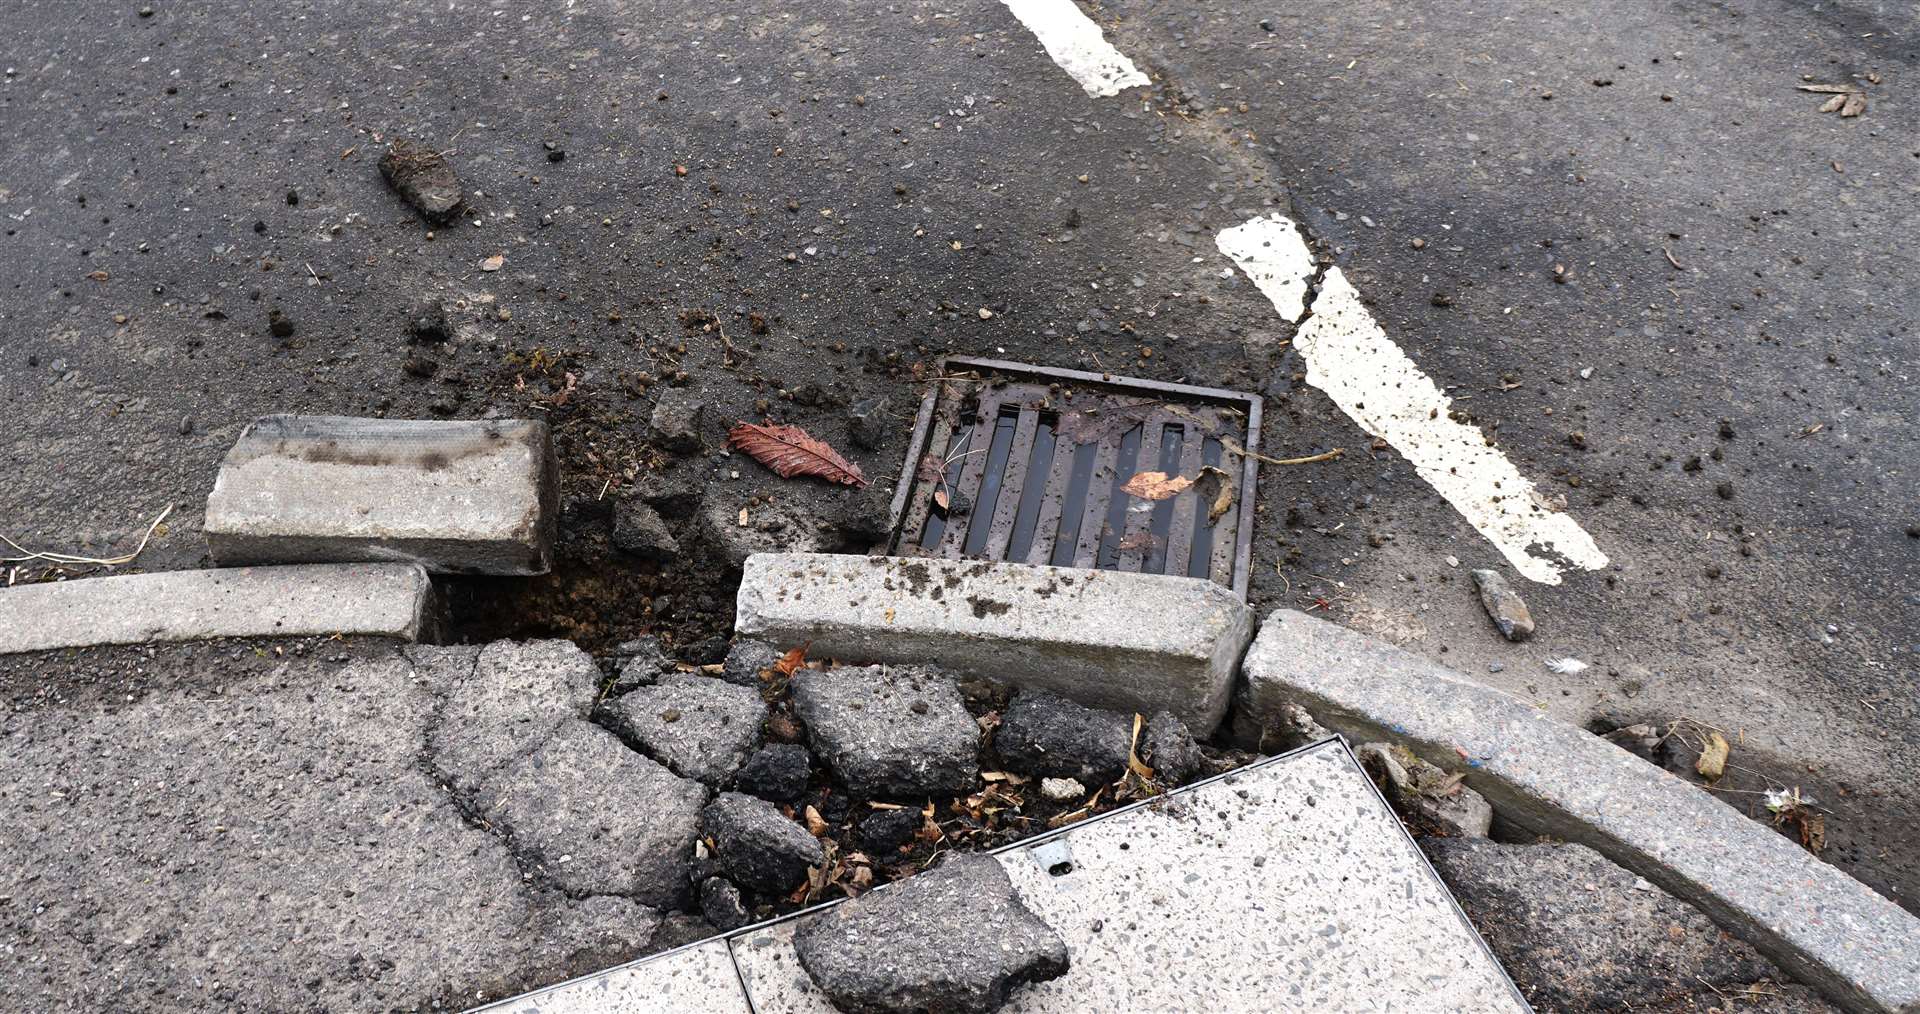 The drain, though recently cleared out, is now full and may be damaged. Kerbstones are knocked out and the pavement is in pieces. There is a BT broadband cover beside the damaged area. Picture: DGS